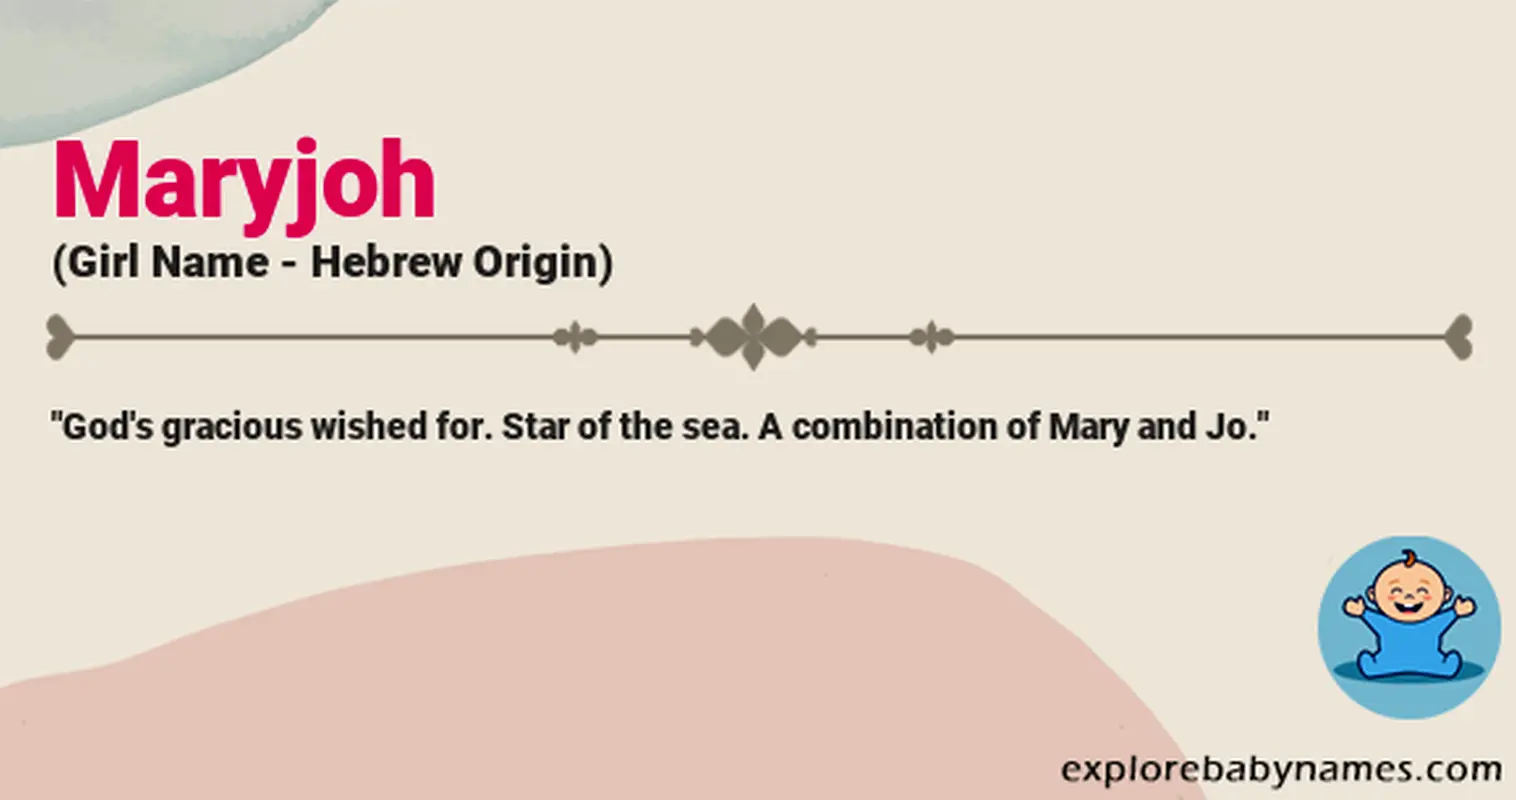 Meaning of Maryjoh